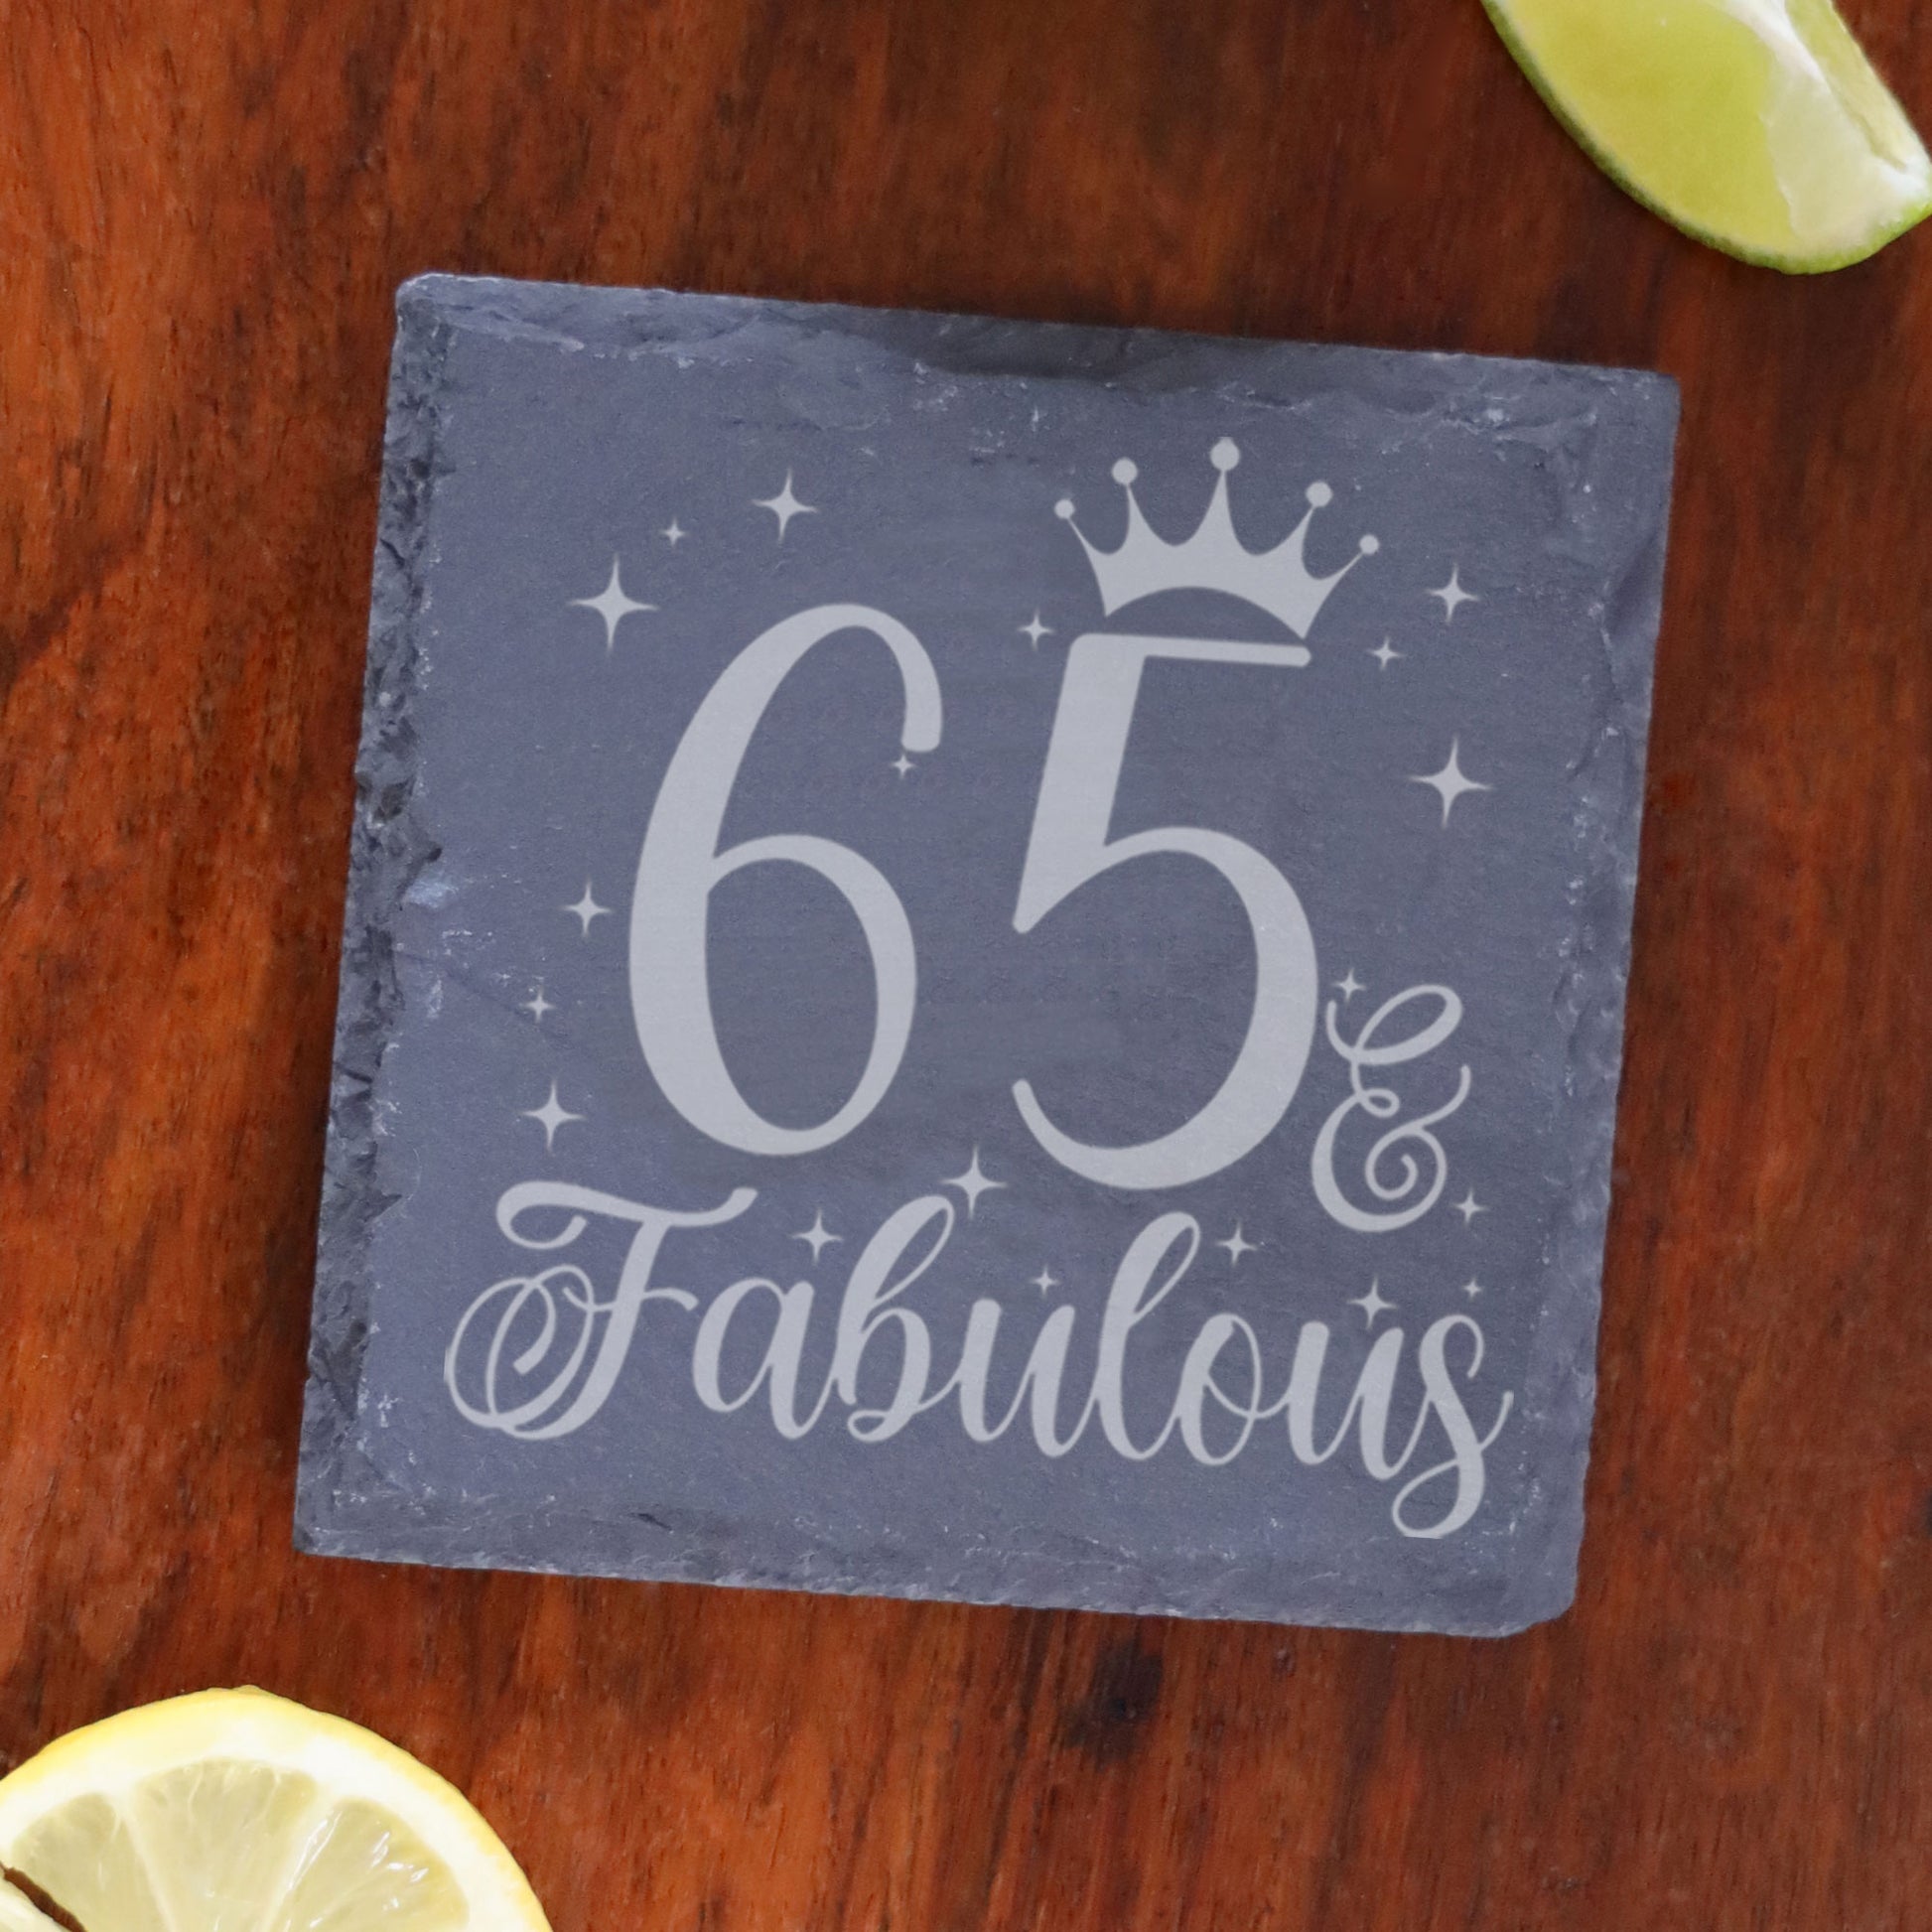 65 & Fabulous 65th Birthday Gift Engraved Wine Glass and/or Coaster Set  - Always Looking Good - Square Coaster Only  